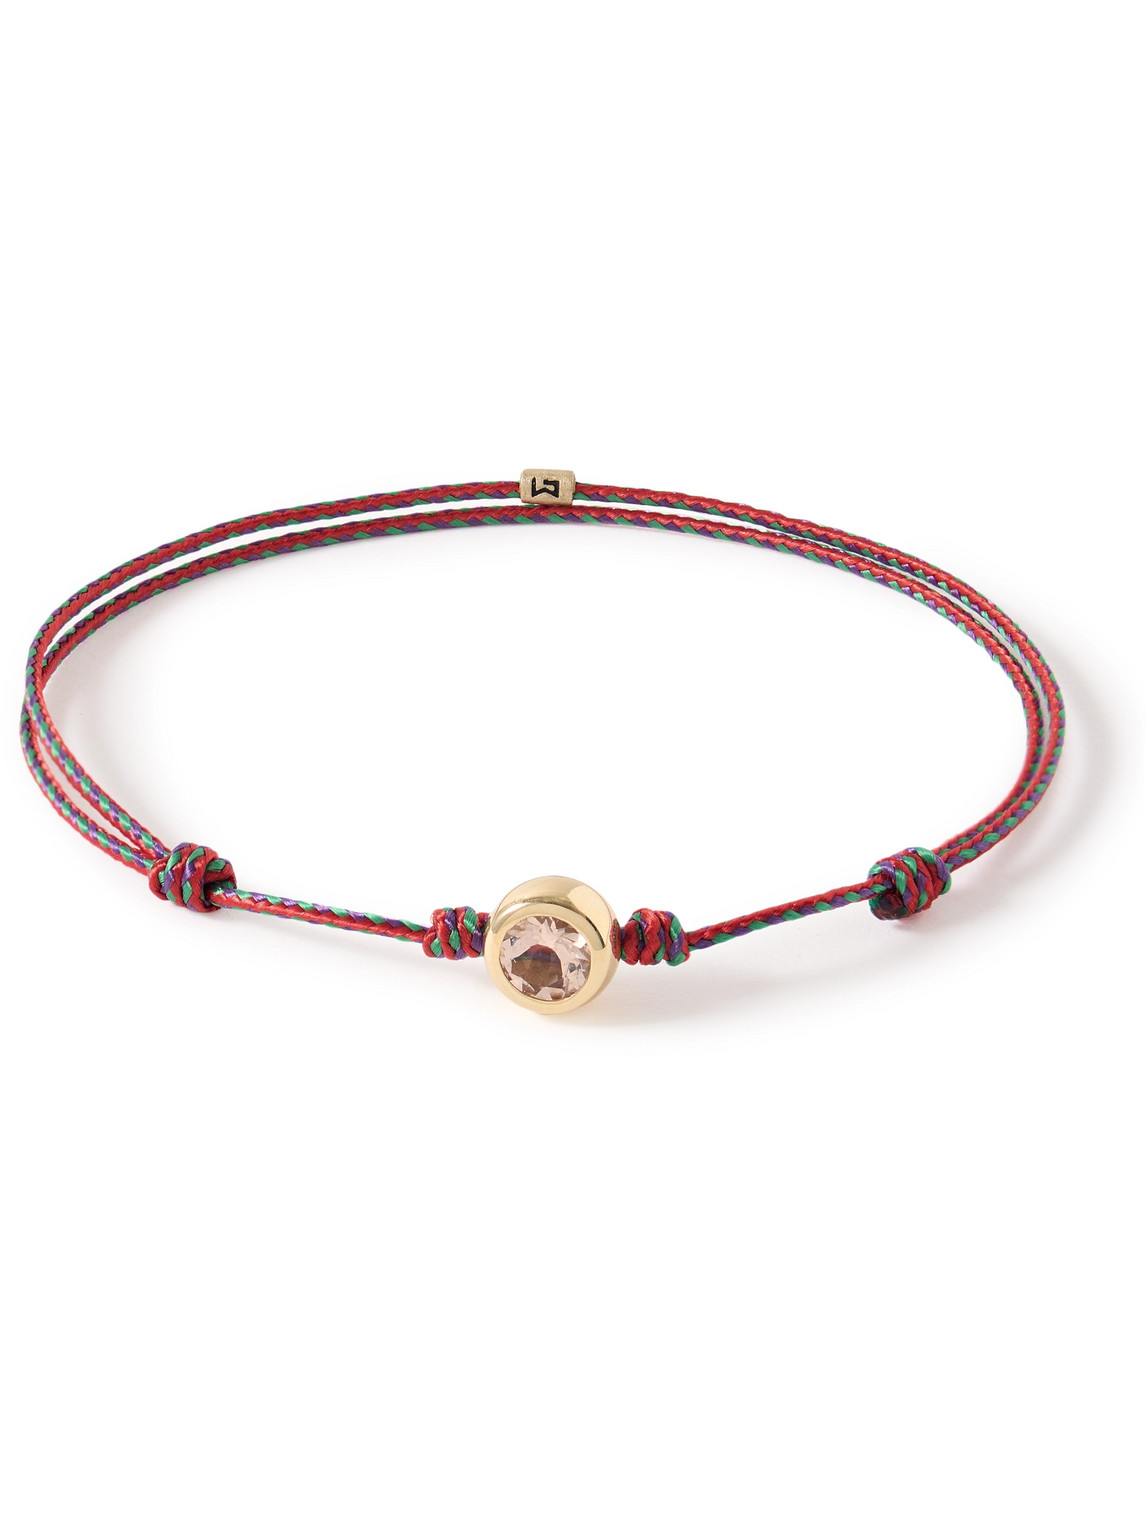 Luis Morais Gold, Morganite And Cord Bracelet In Red